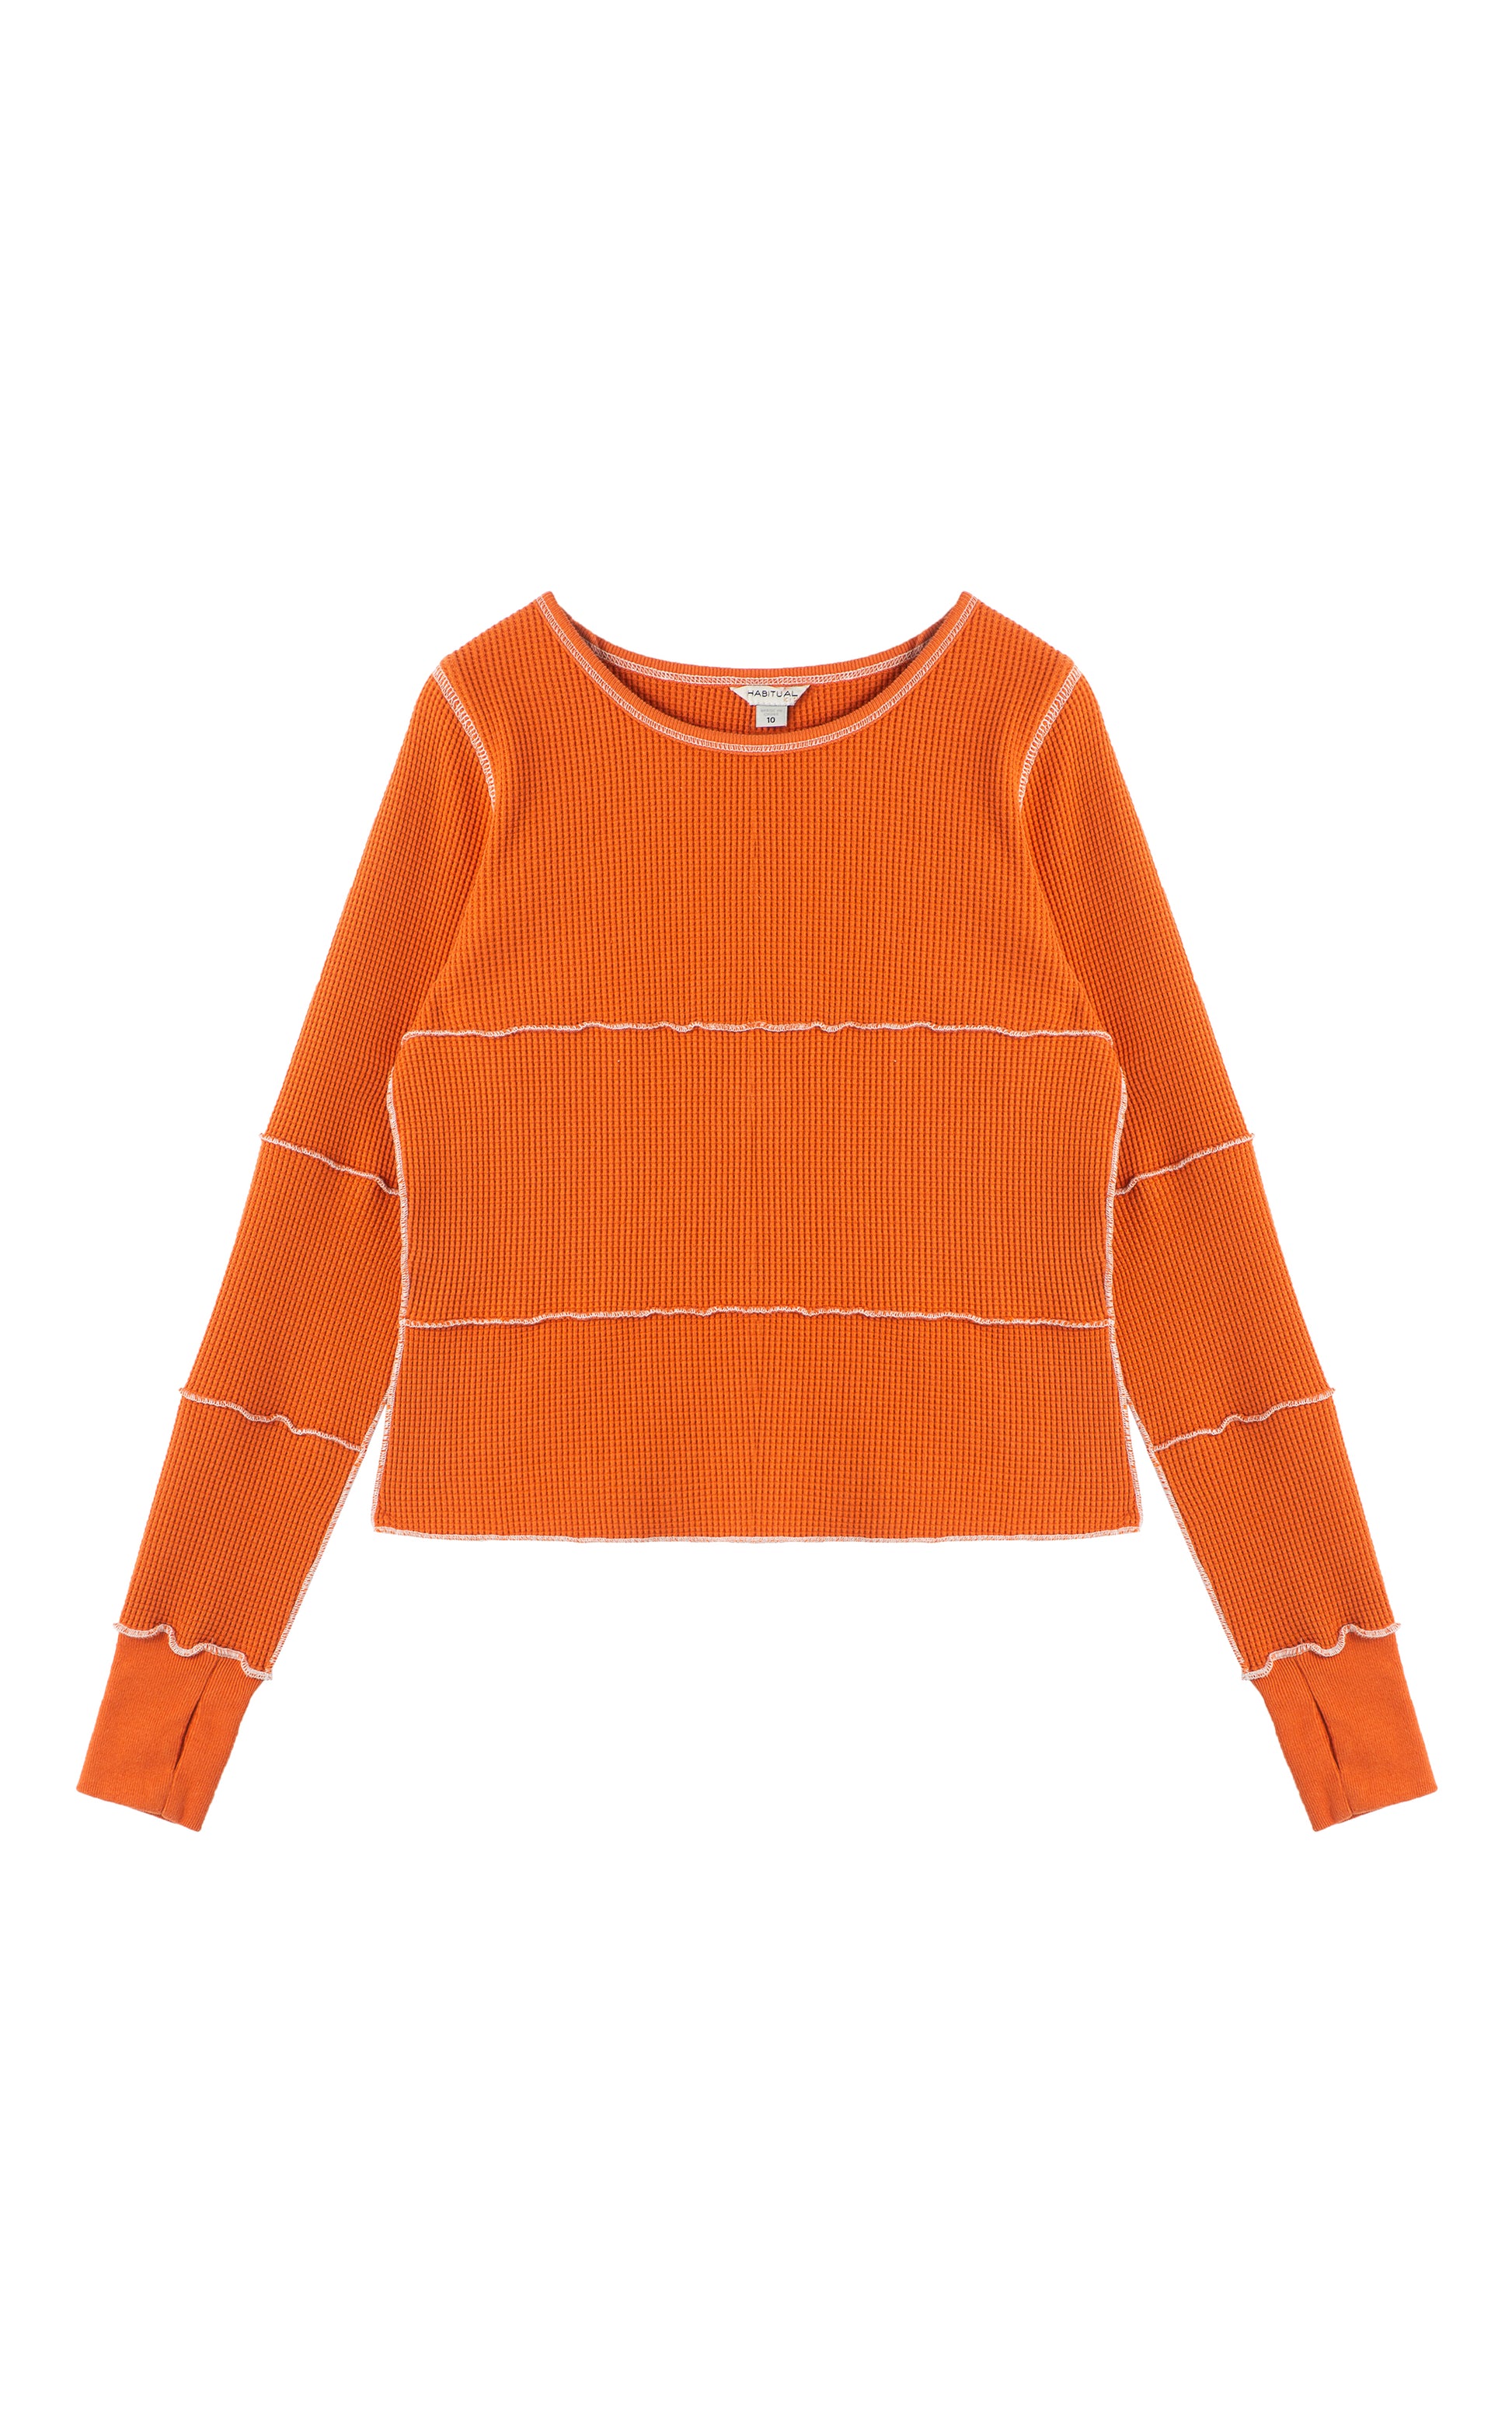 Front view of orange long sleeve with white stitching 